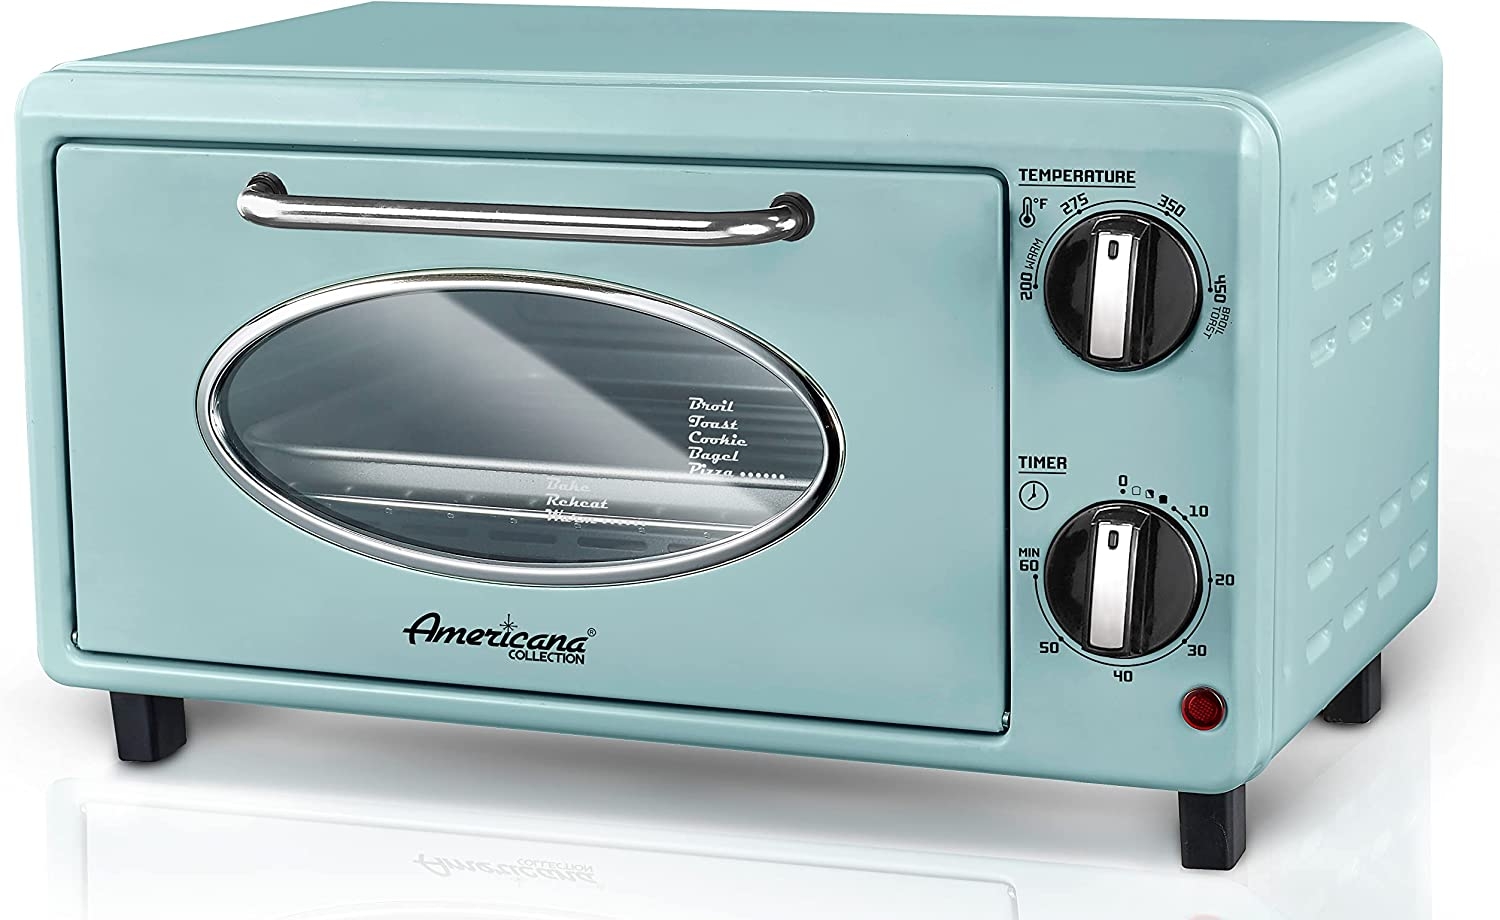 Elite Gourmet by Maximatic Americana Collection ETO147M Diner 50’s Retro Countertop Toaster oven, Bake, Toast, Fits 8”